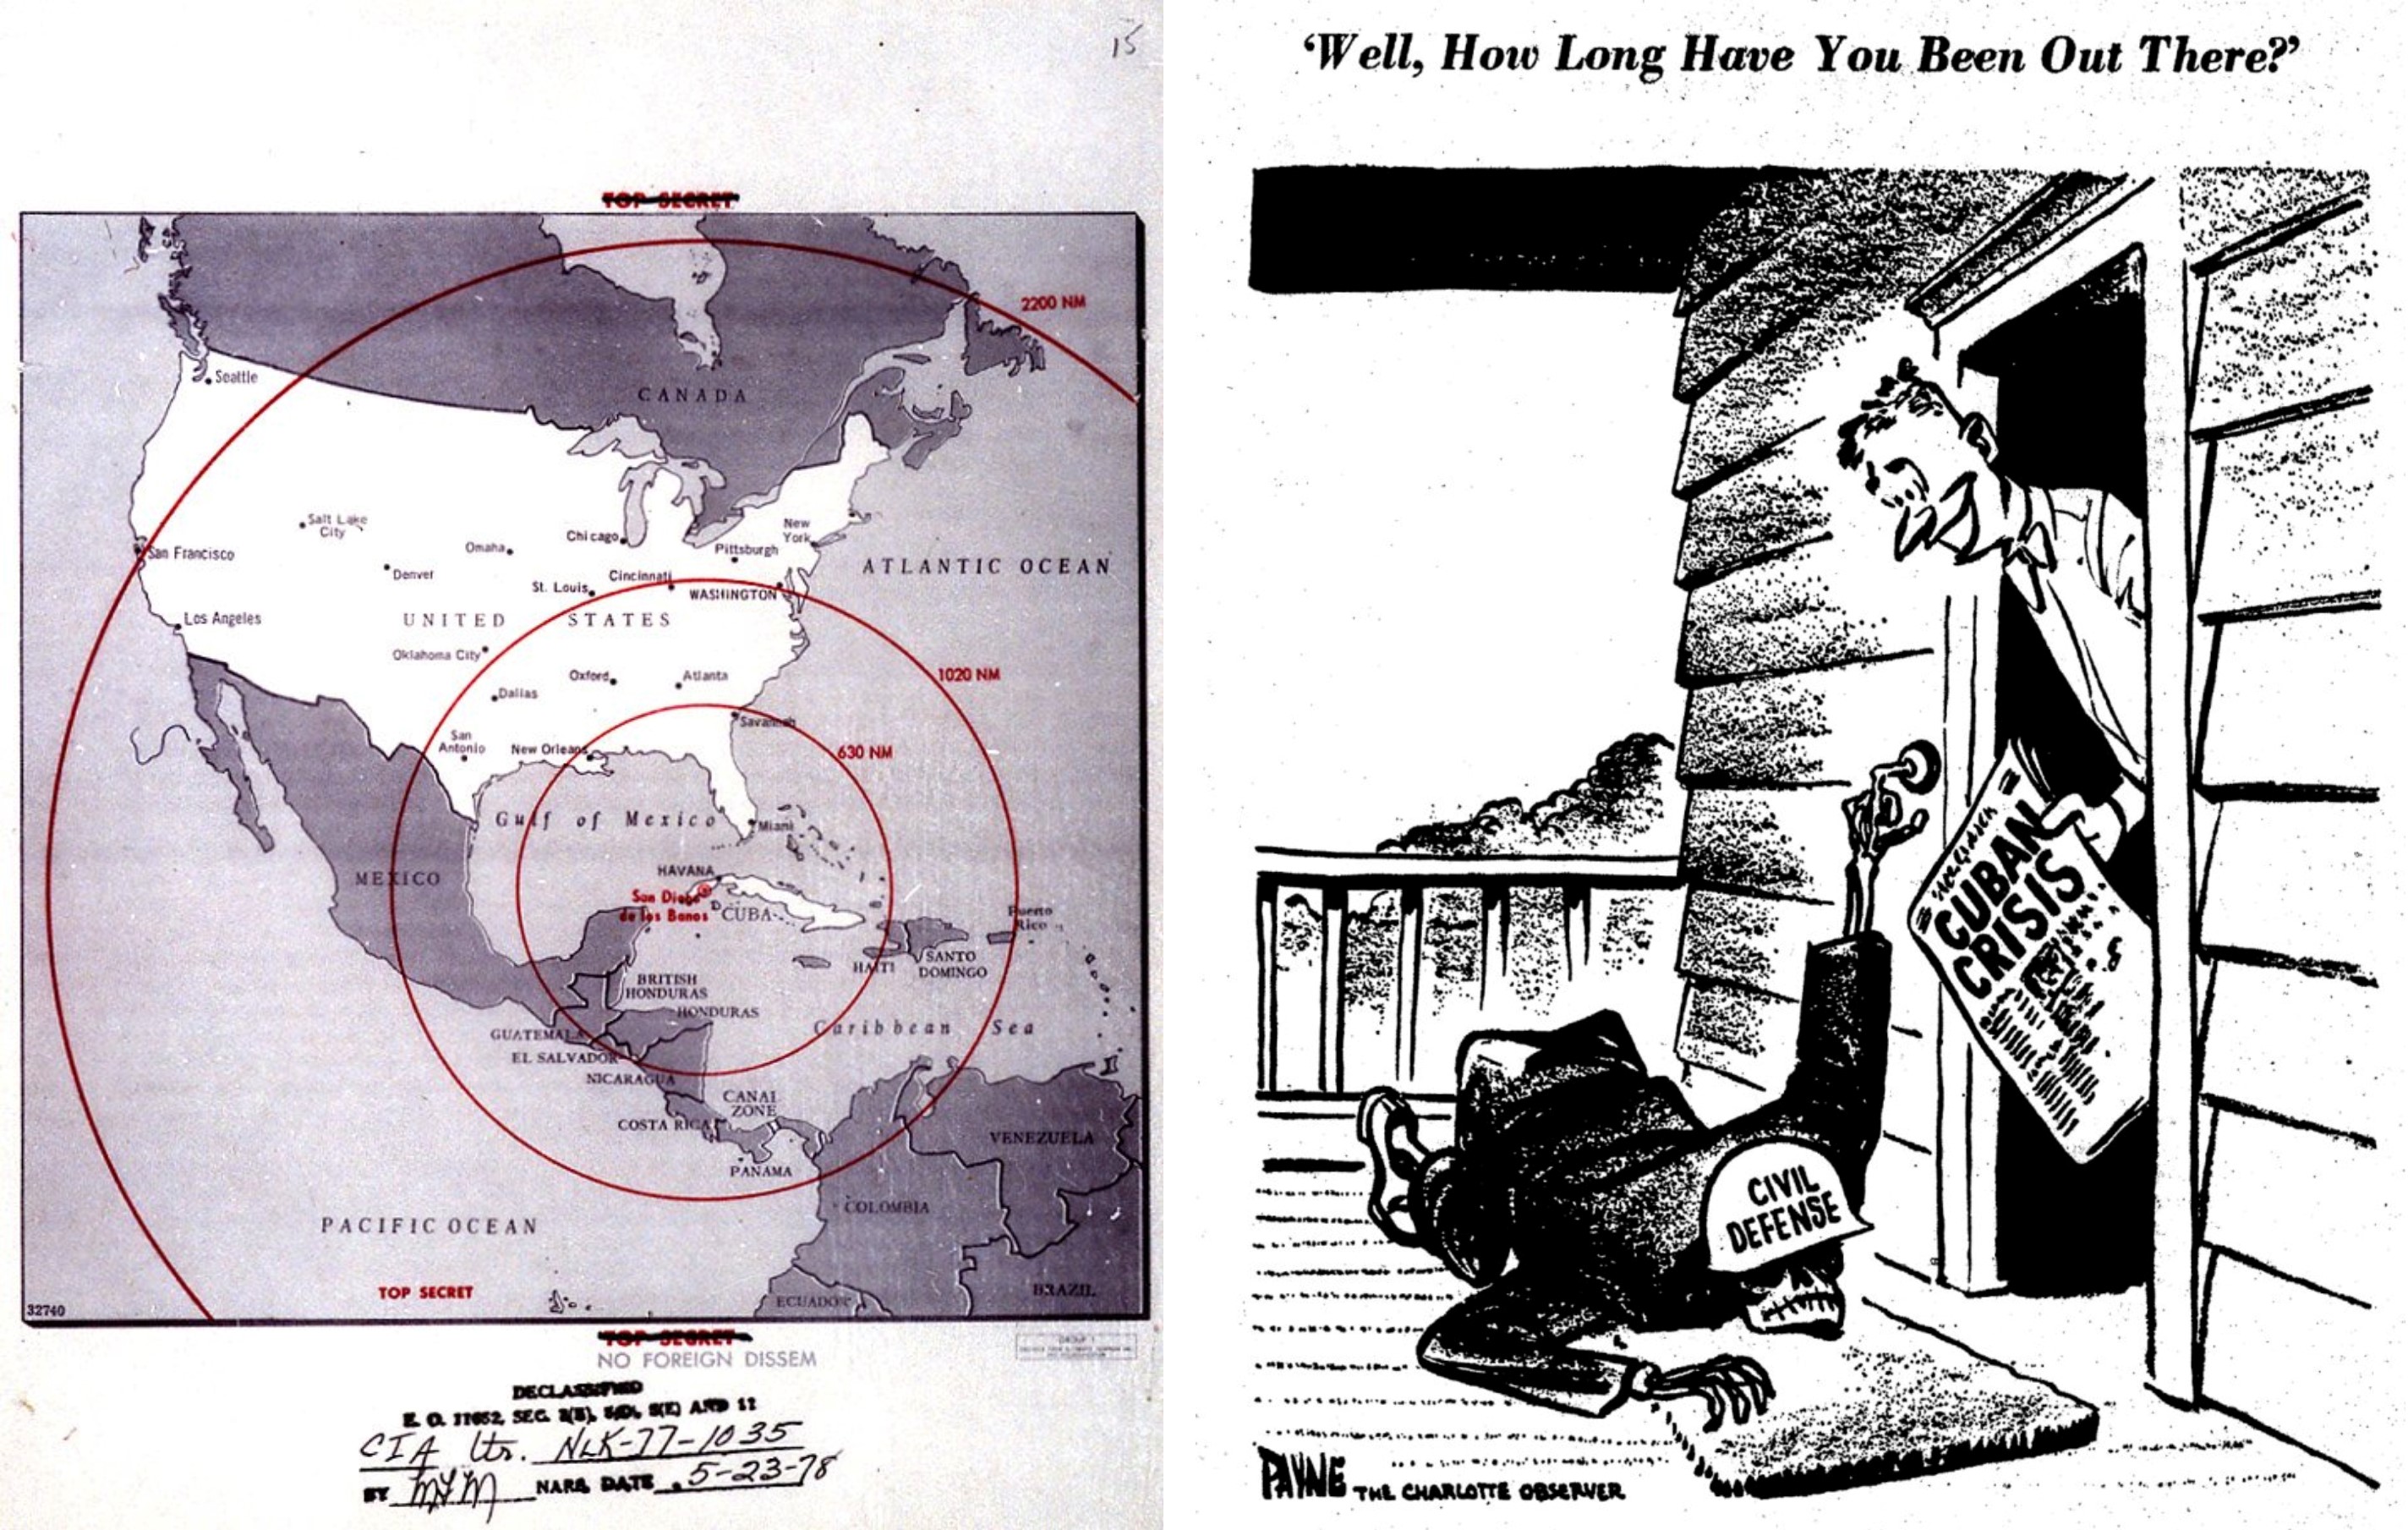 On the left, map illustrating missile ranges. On the right, a political cartoon from the Charlotte Observer.